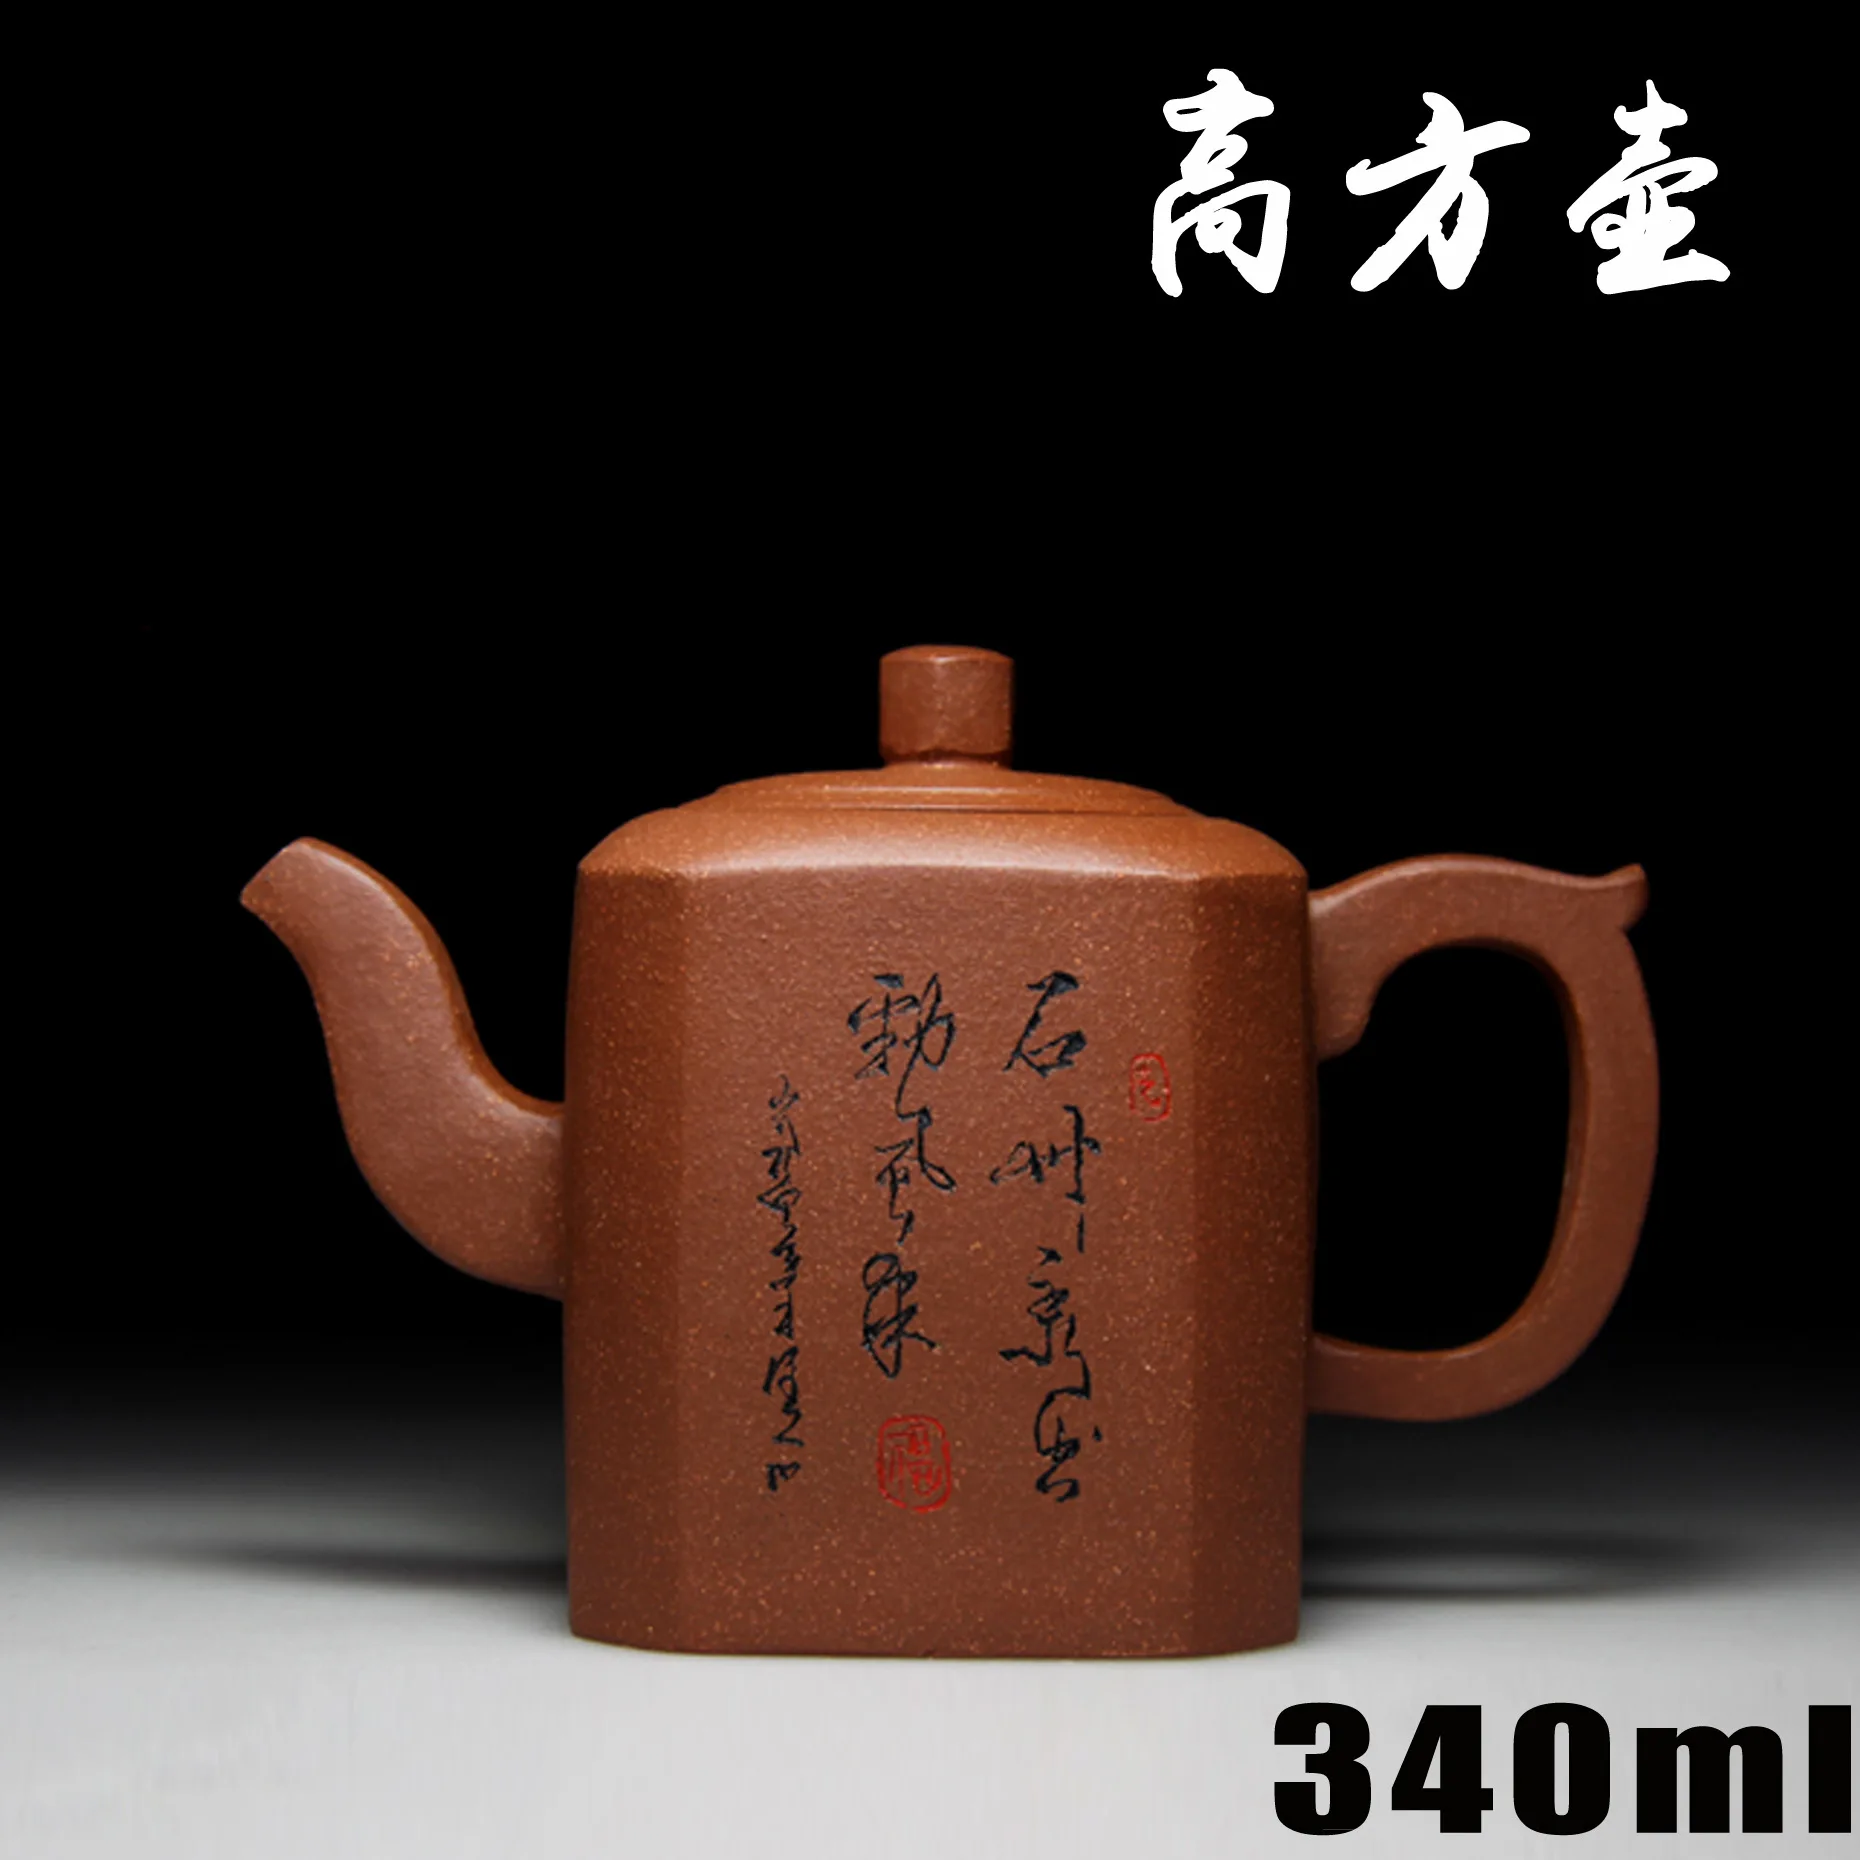 

Authentic Yixing Zisha masters handmade teapot ore with high mud slope side pot crafts wholesale and retail 544